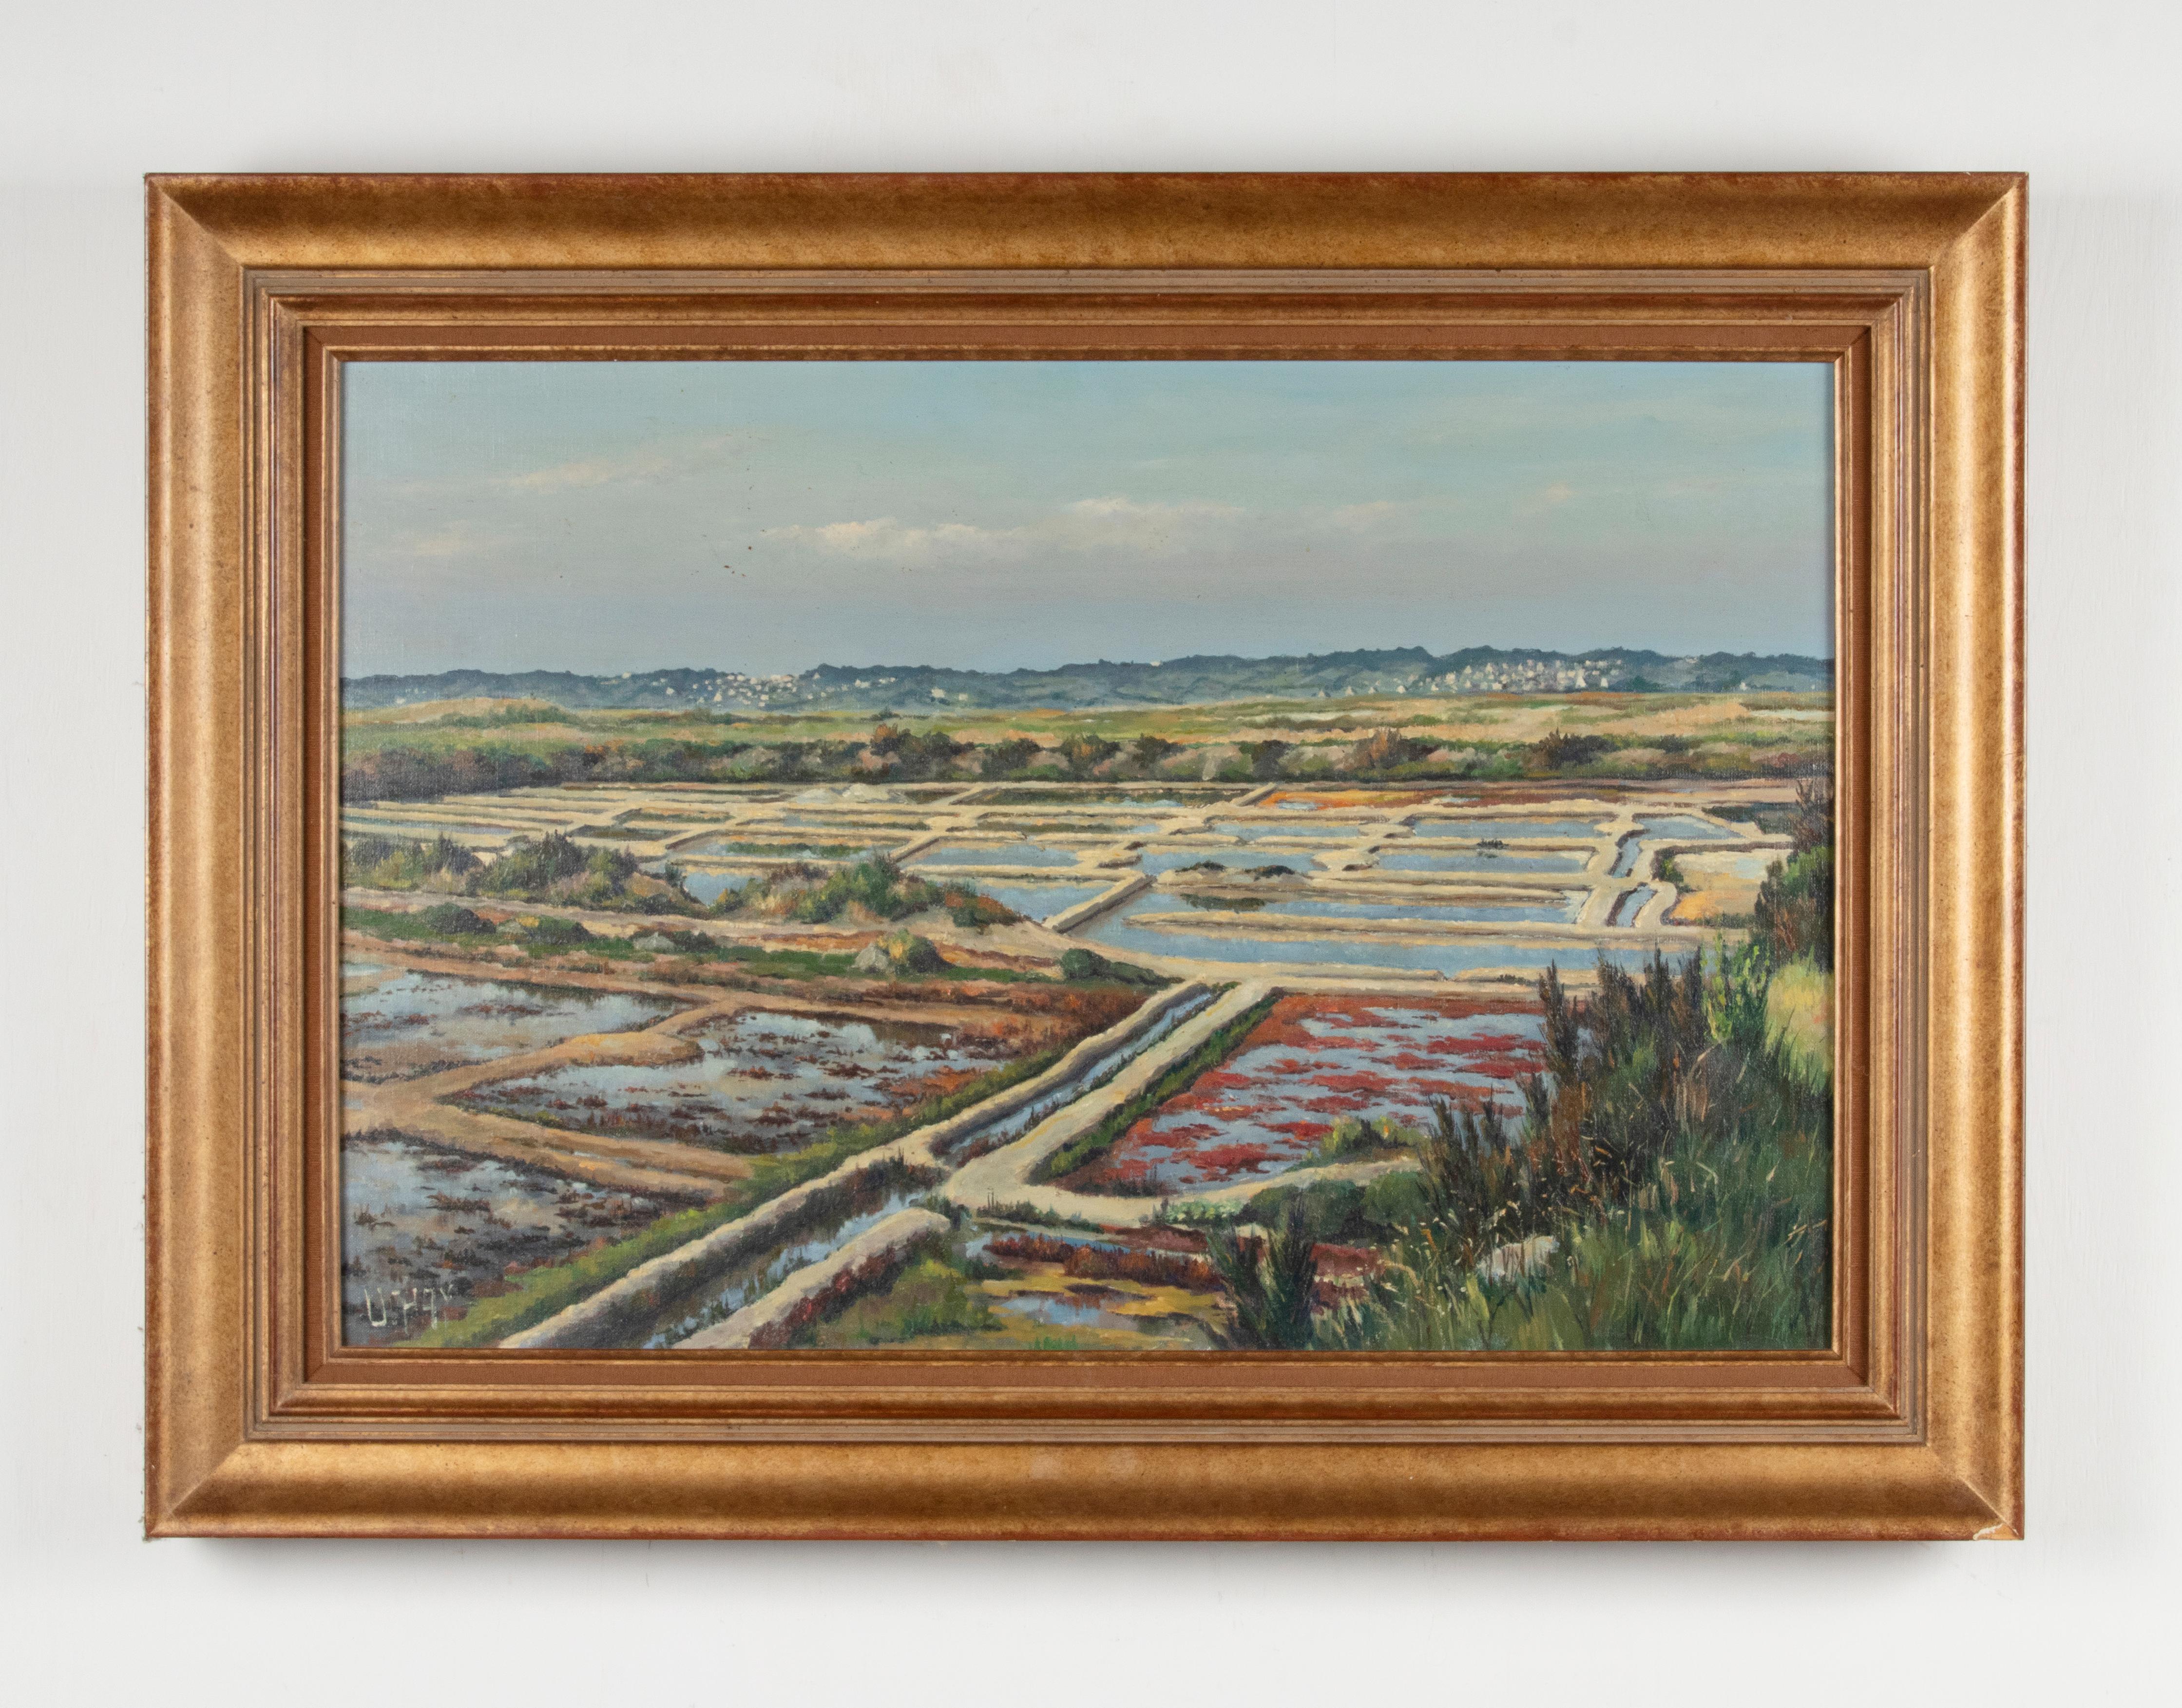 Oil painting of sea salt salt production reservoirs at he Breton coast of France. Signed left under: René UCHAY. The sea salt is extracted in a traditional way at Guérande and on the island of Noirmoutier and is widely used in French cuisine.

René